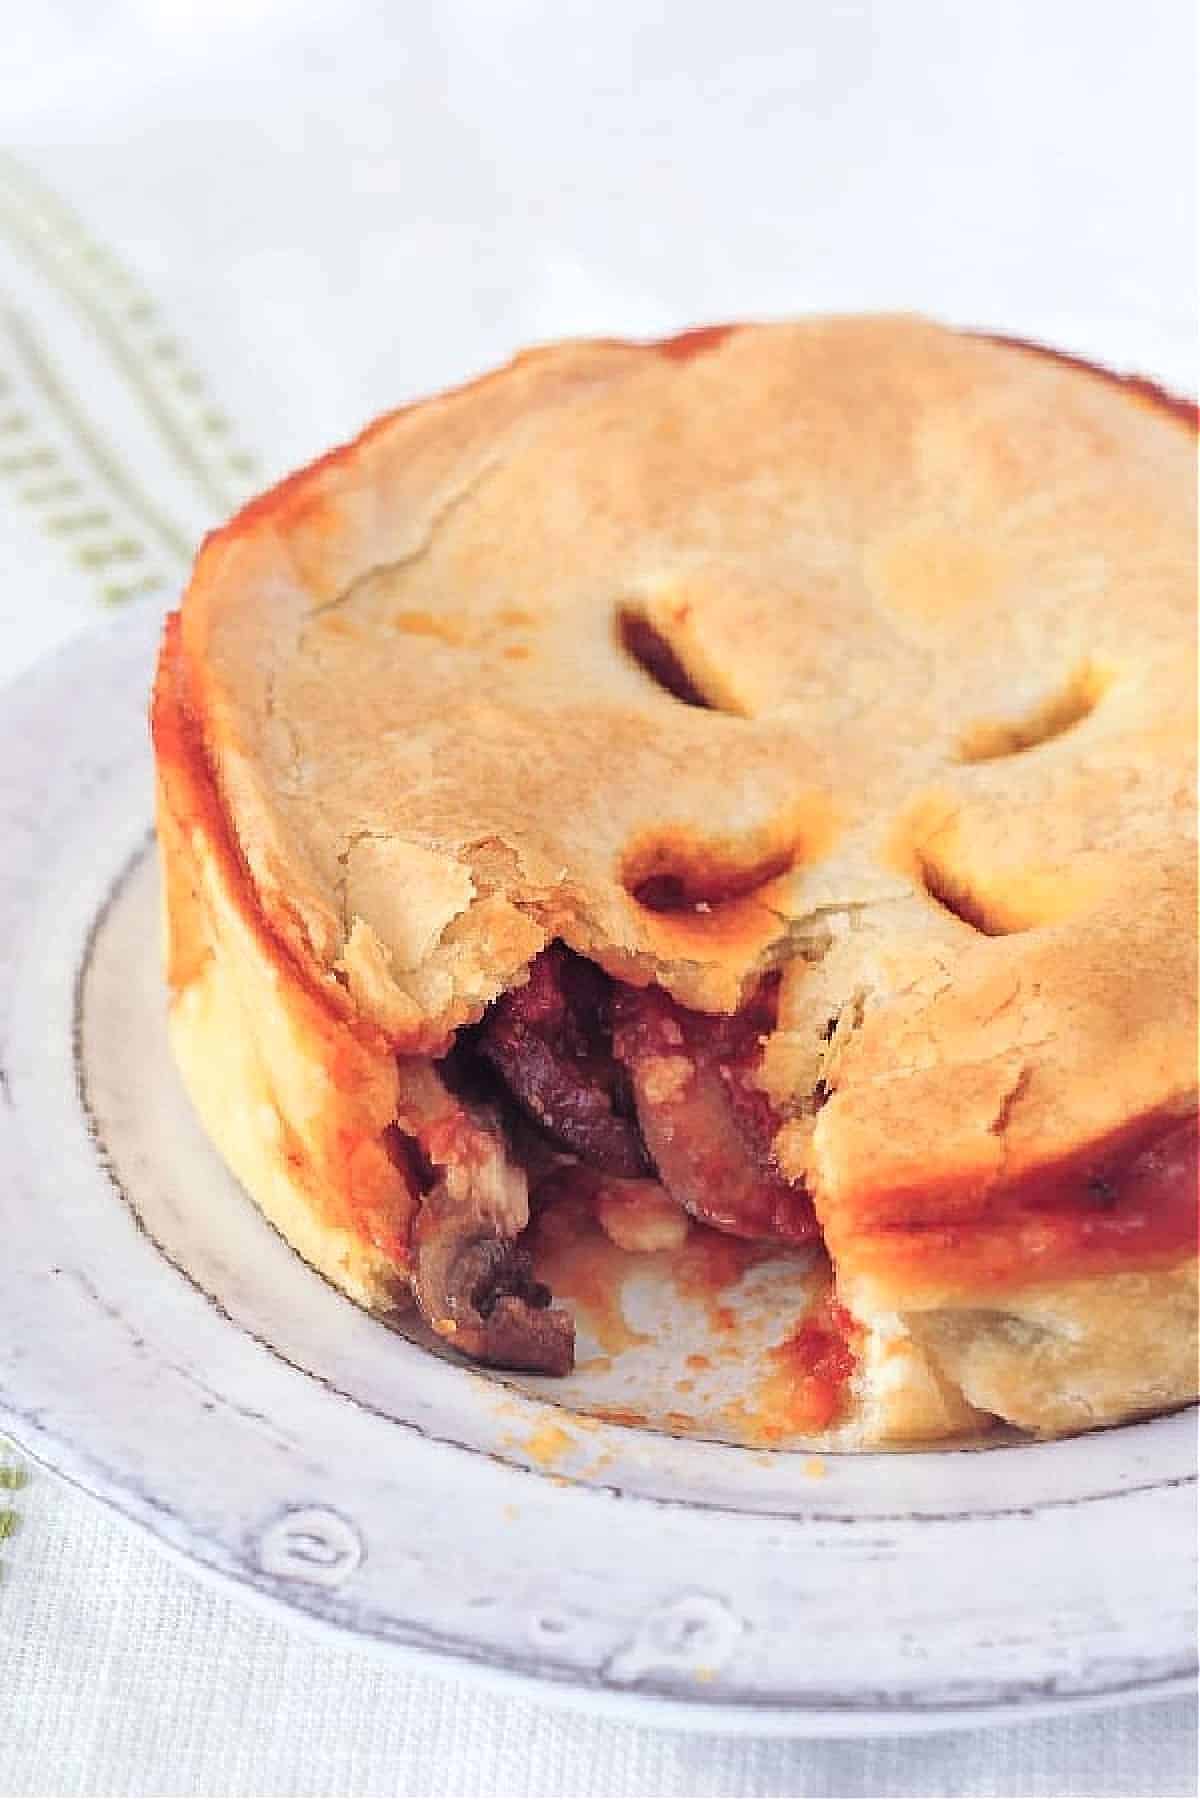 A mini deep dish pizza pot pie on a dish, one bite removed to show filling of mushrooms, sauce, cheese.